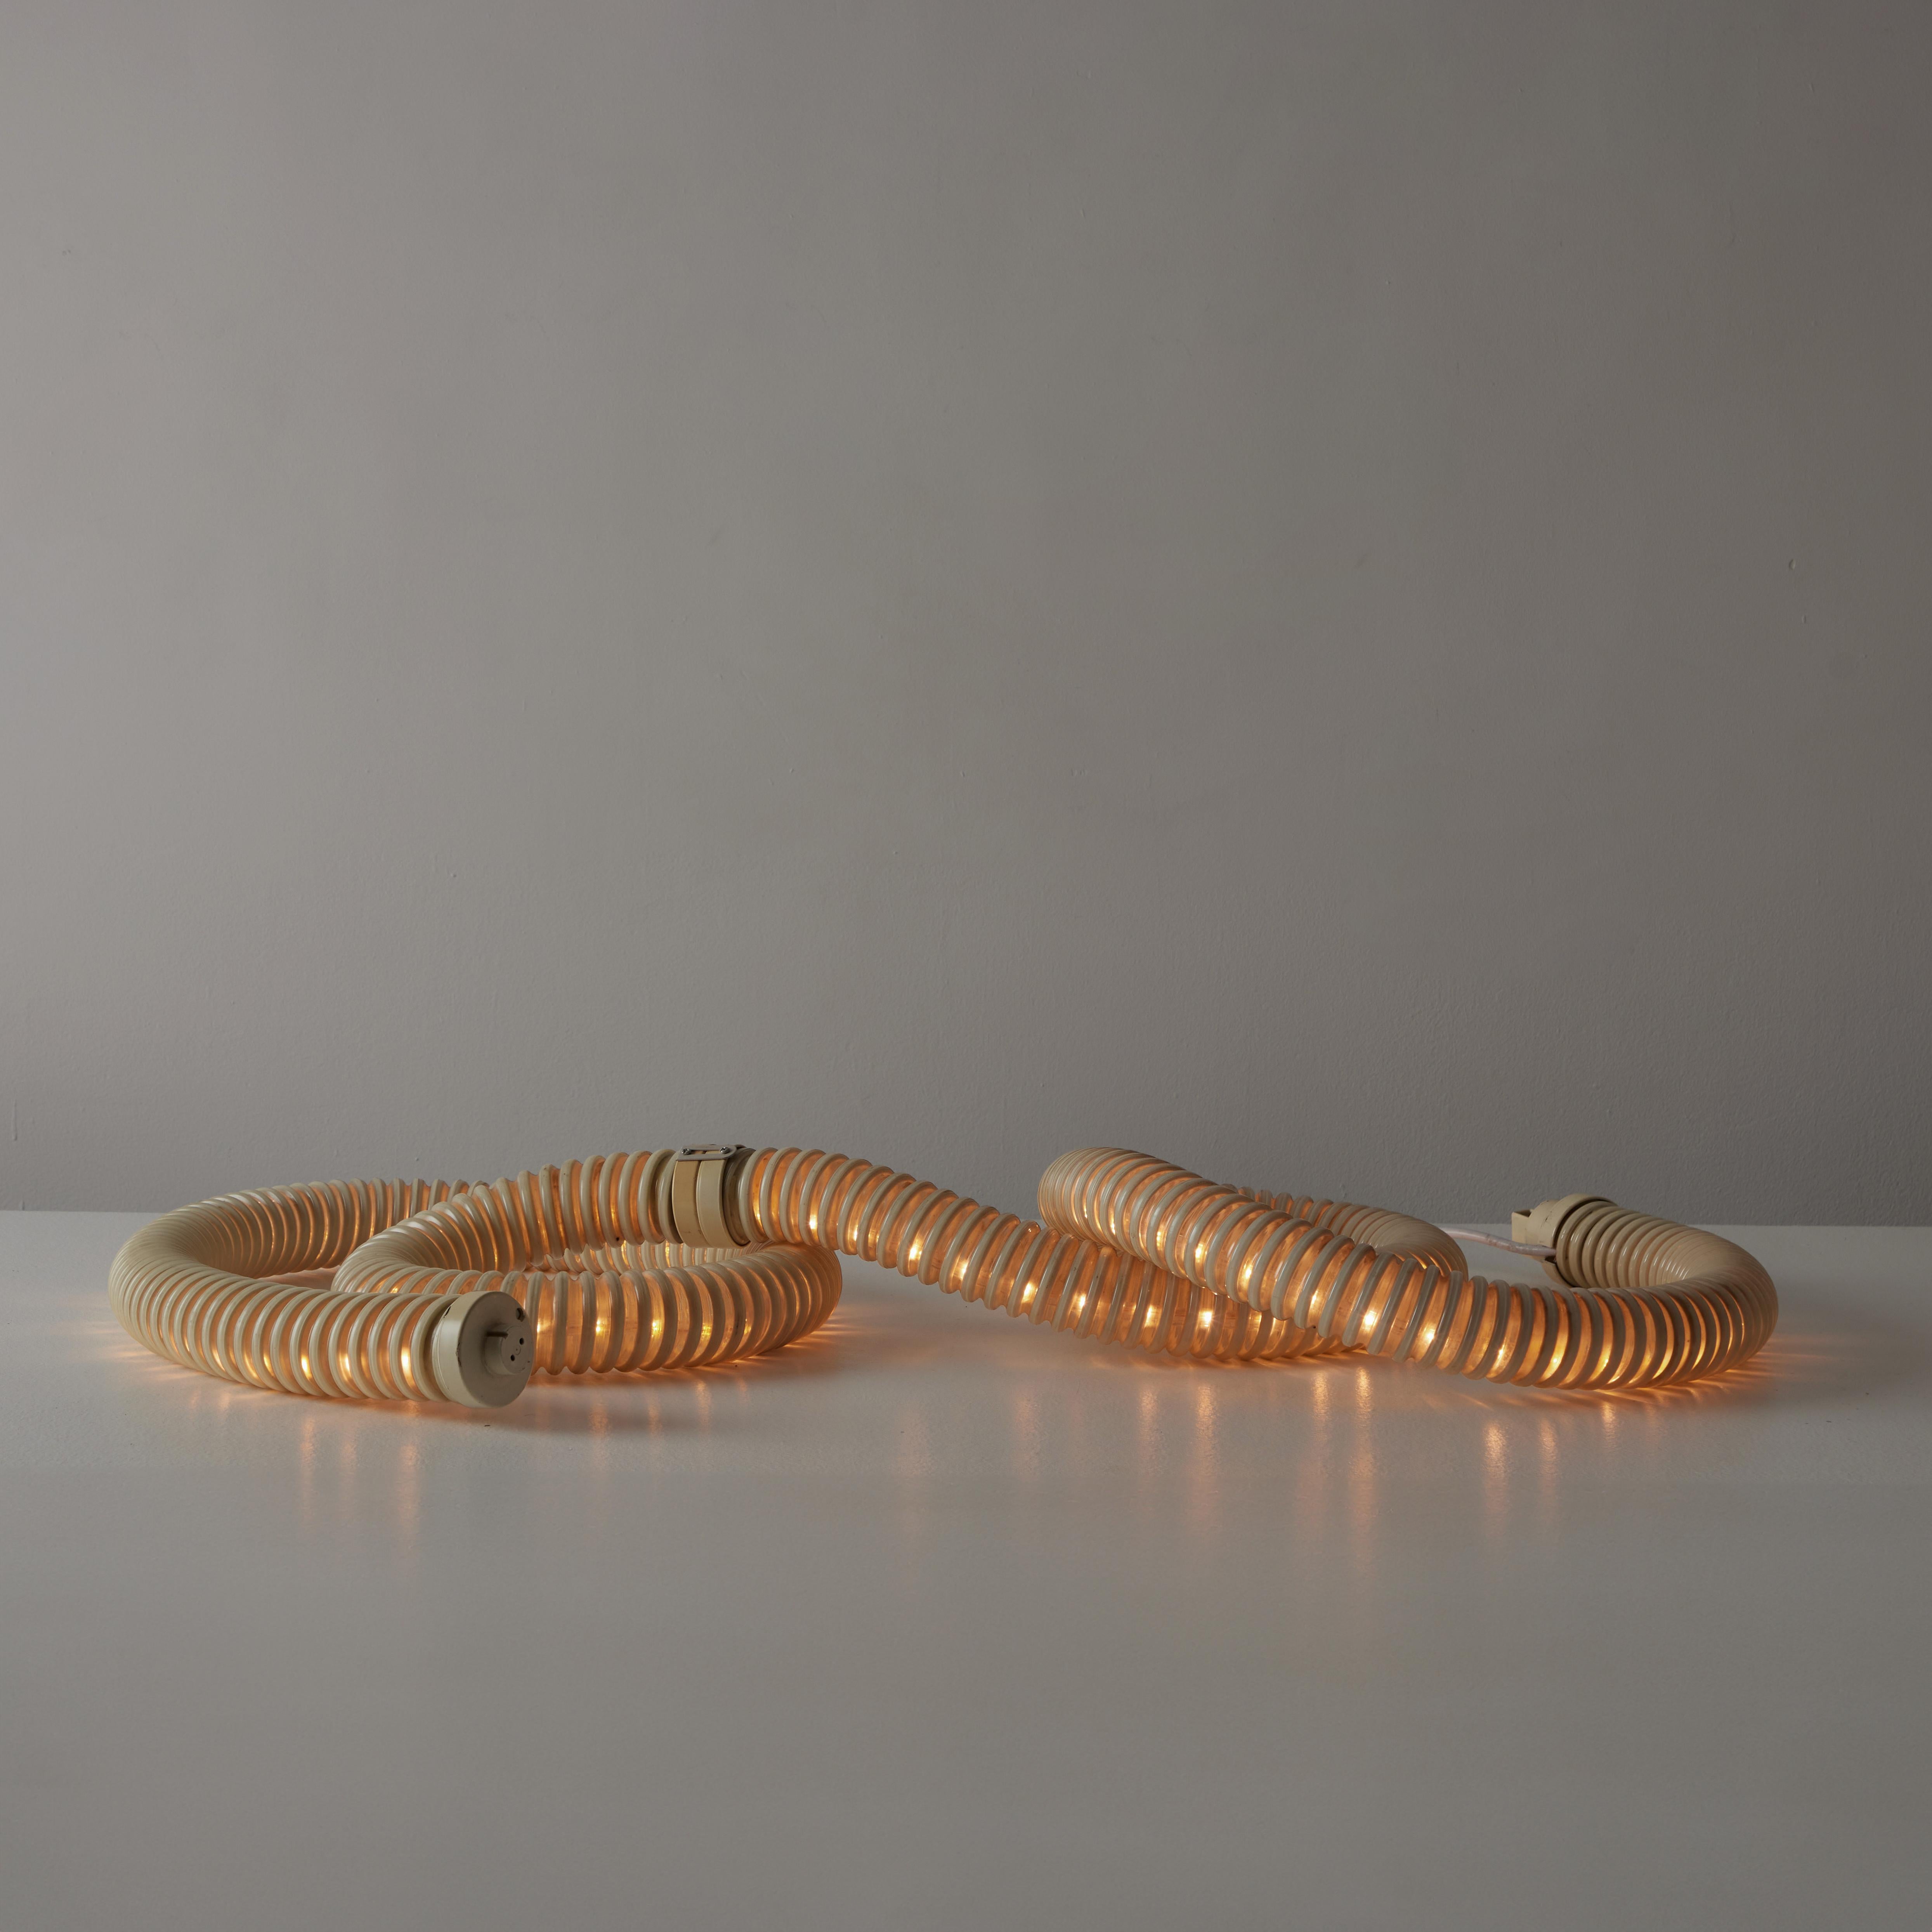 'Boalum' Lamp by Livio Castiglioni and Gianfranco Frattini for Artemide. Design and manufactured in the 1970s. And off-white and clear malleable special PVC casing is laced with an LED light strip. The snake like lamp can be manipulated in many